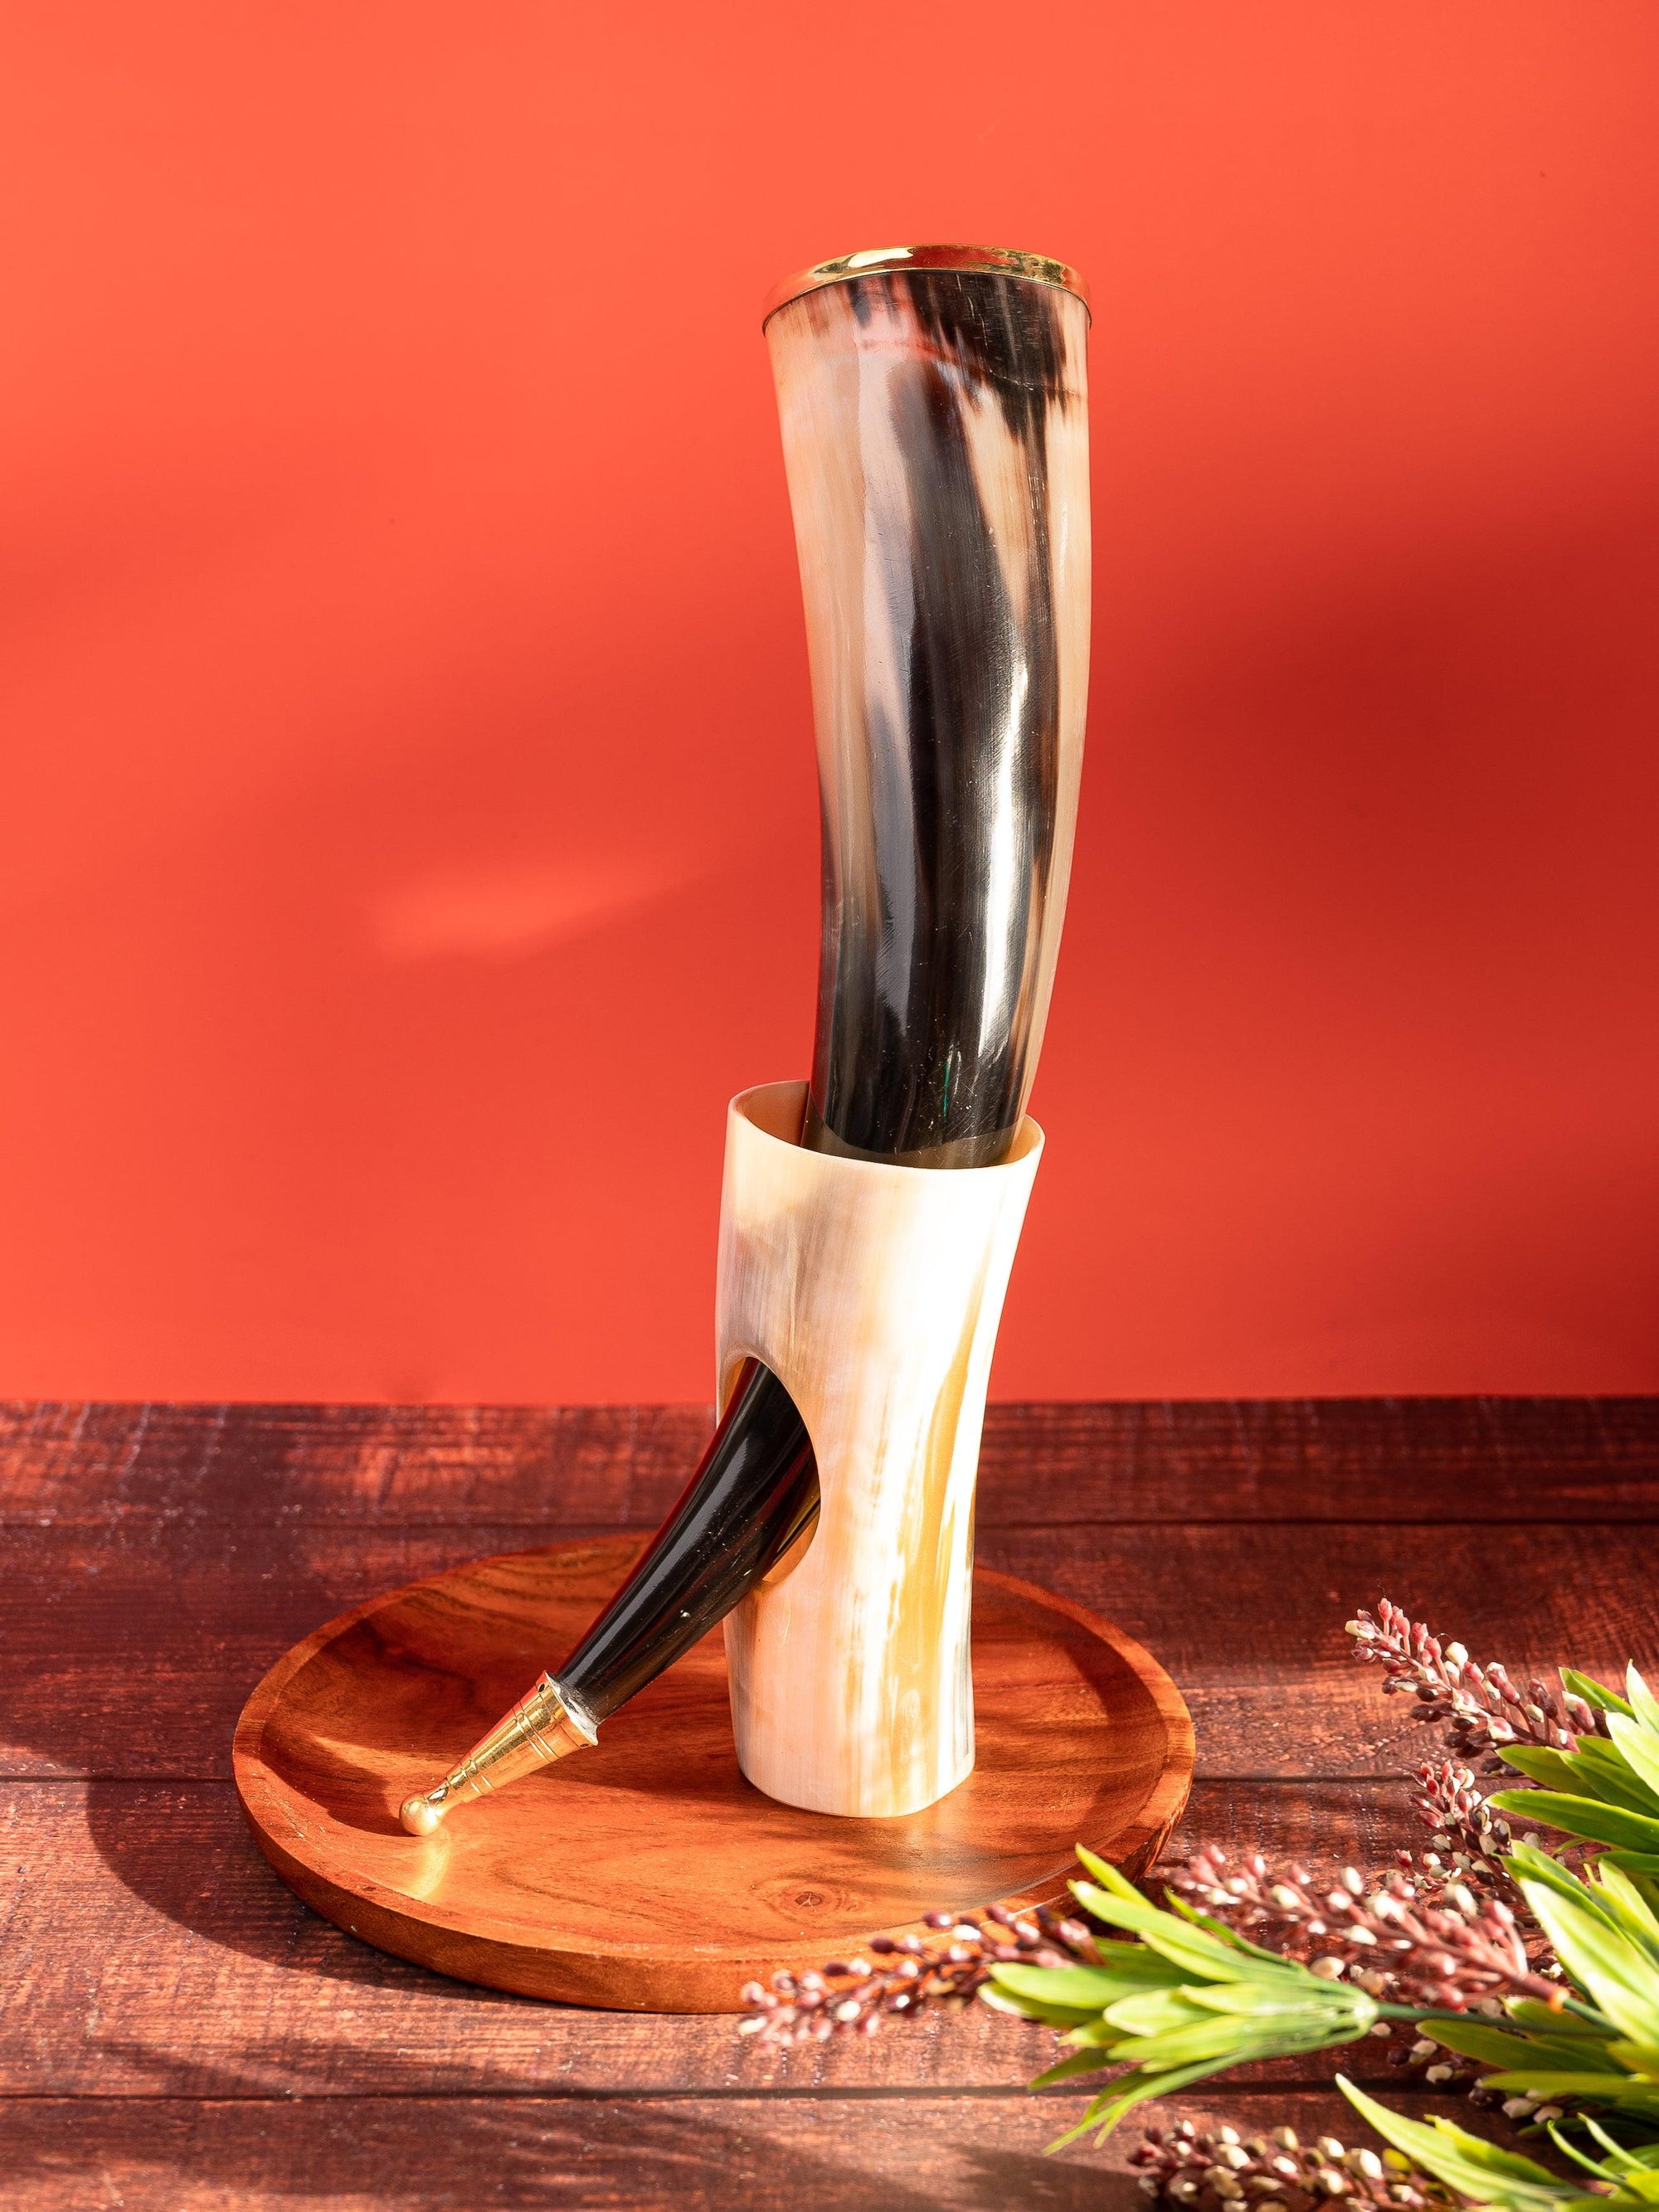 Natural Buffalo Horn Golden tipped Showpiece with Stand - 12 inches height - The Heritage Artifacts